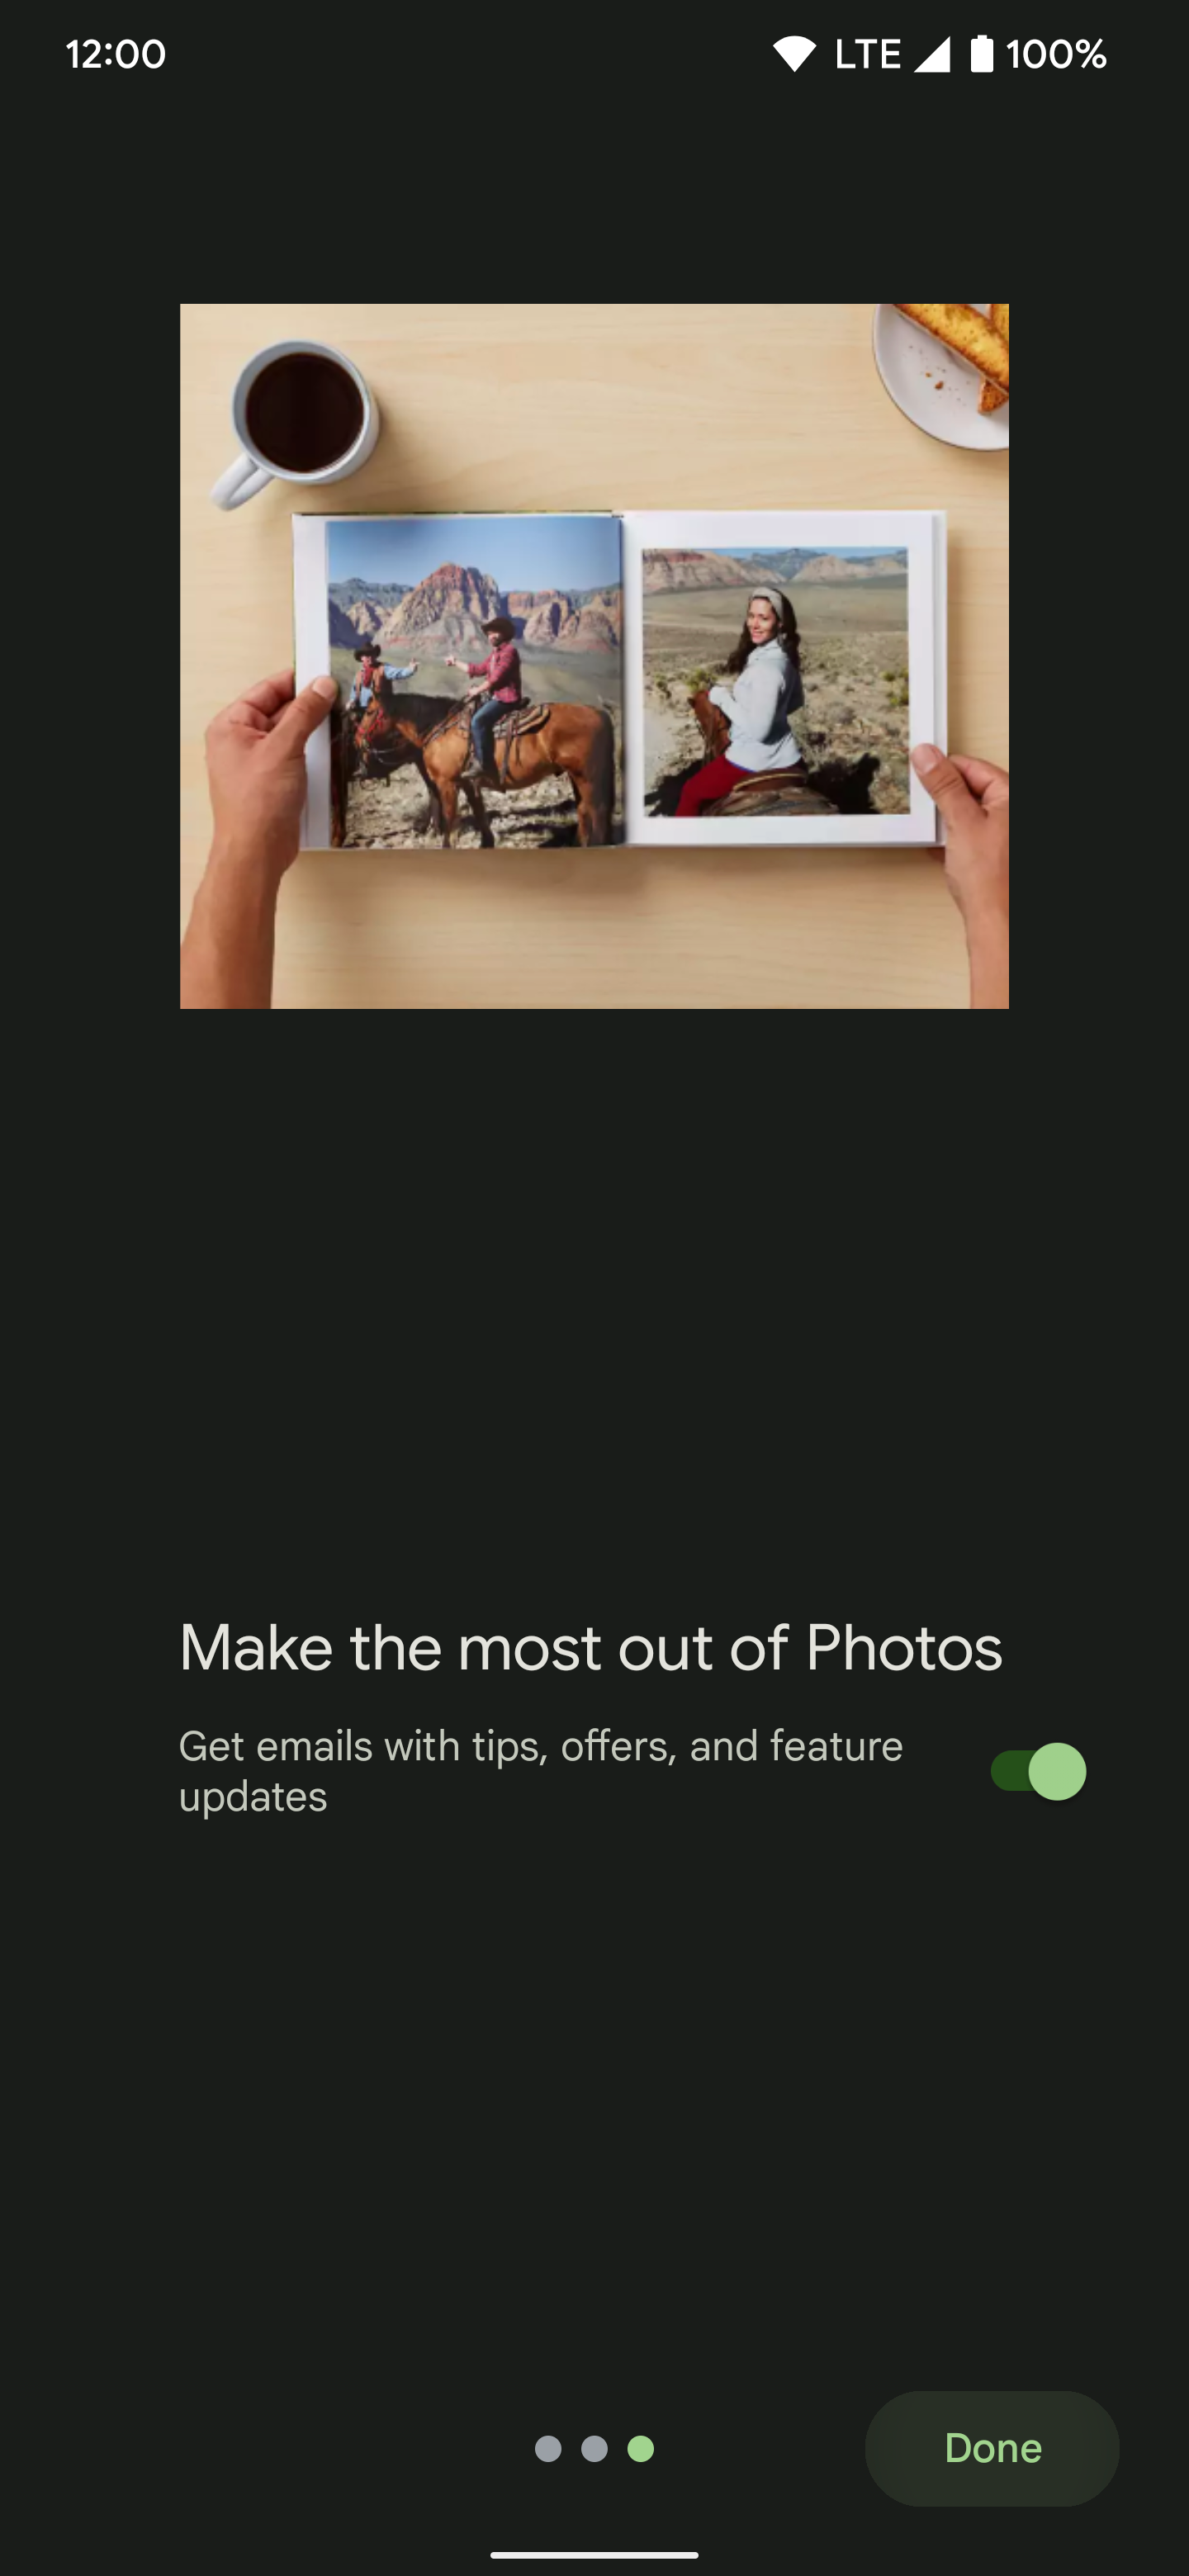 Finishing the intro page right before the main Google Photos screen